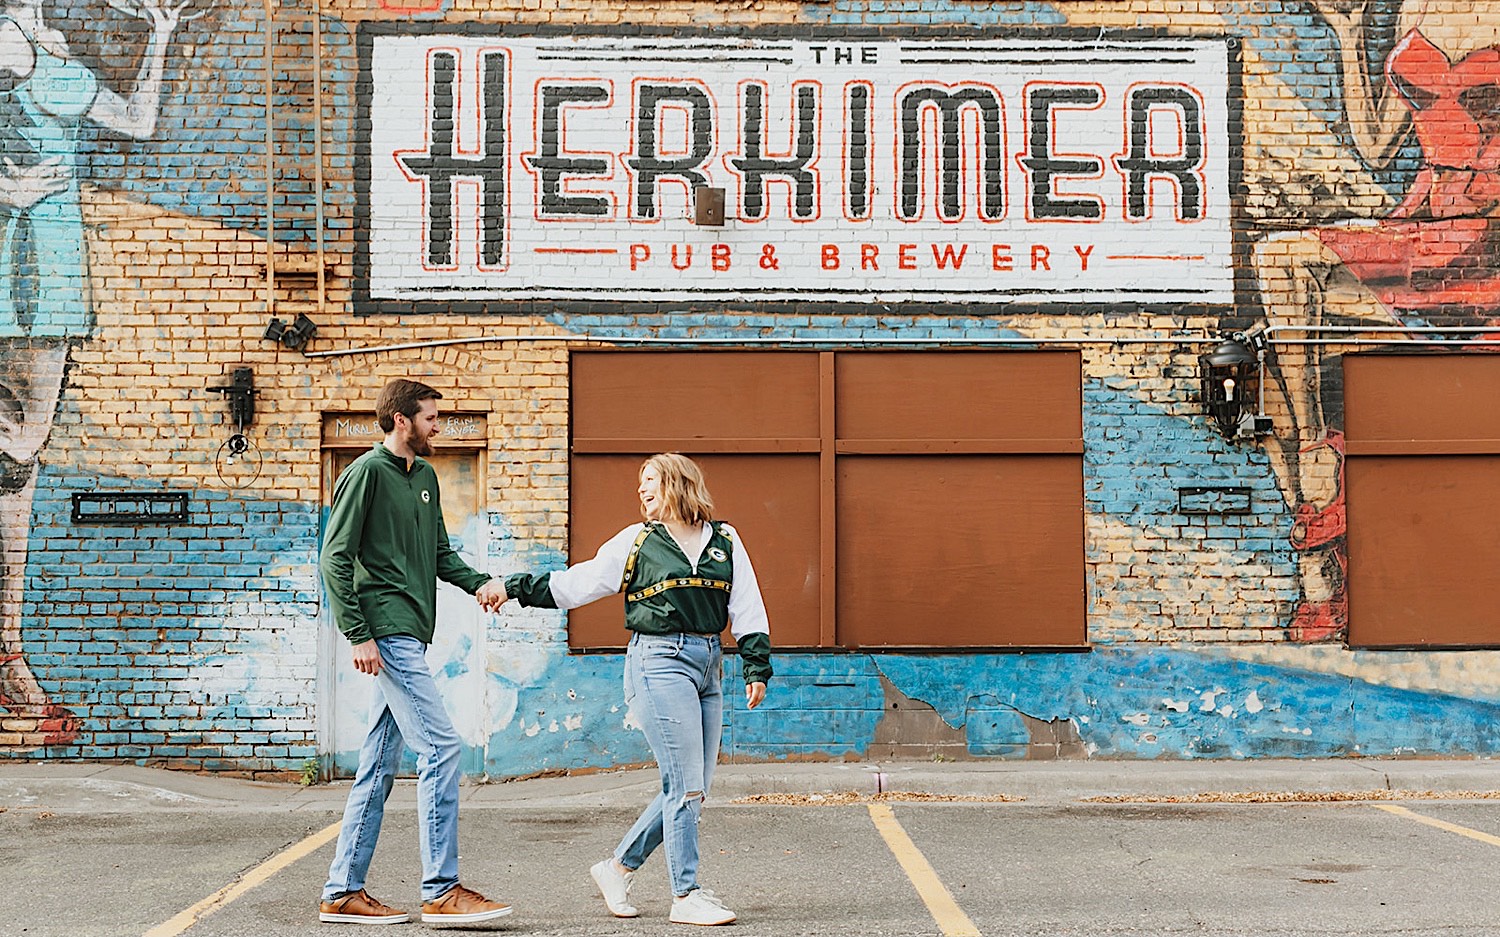 While taking engagement photos in downtown Minneapolis a woman looks back at a man while the two walk holding hands in front of a mural on a brick wall